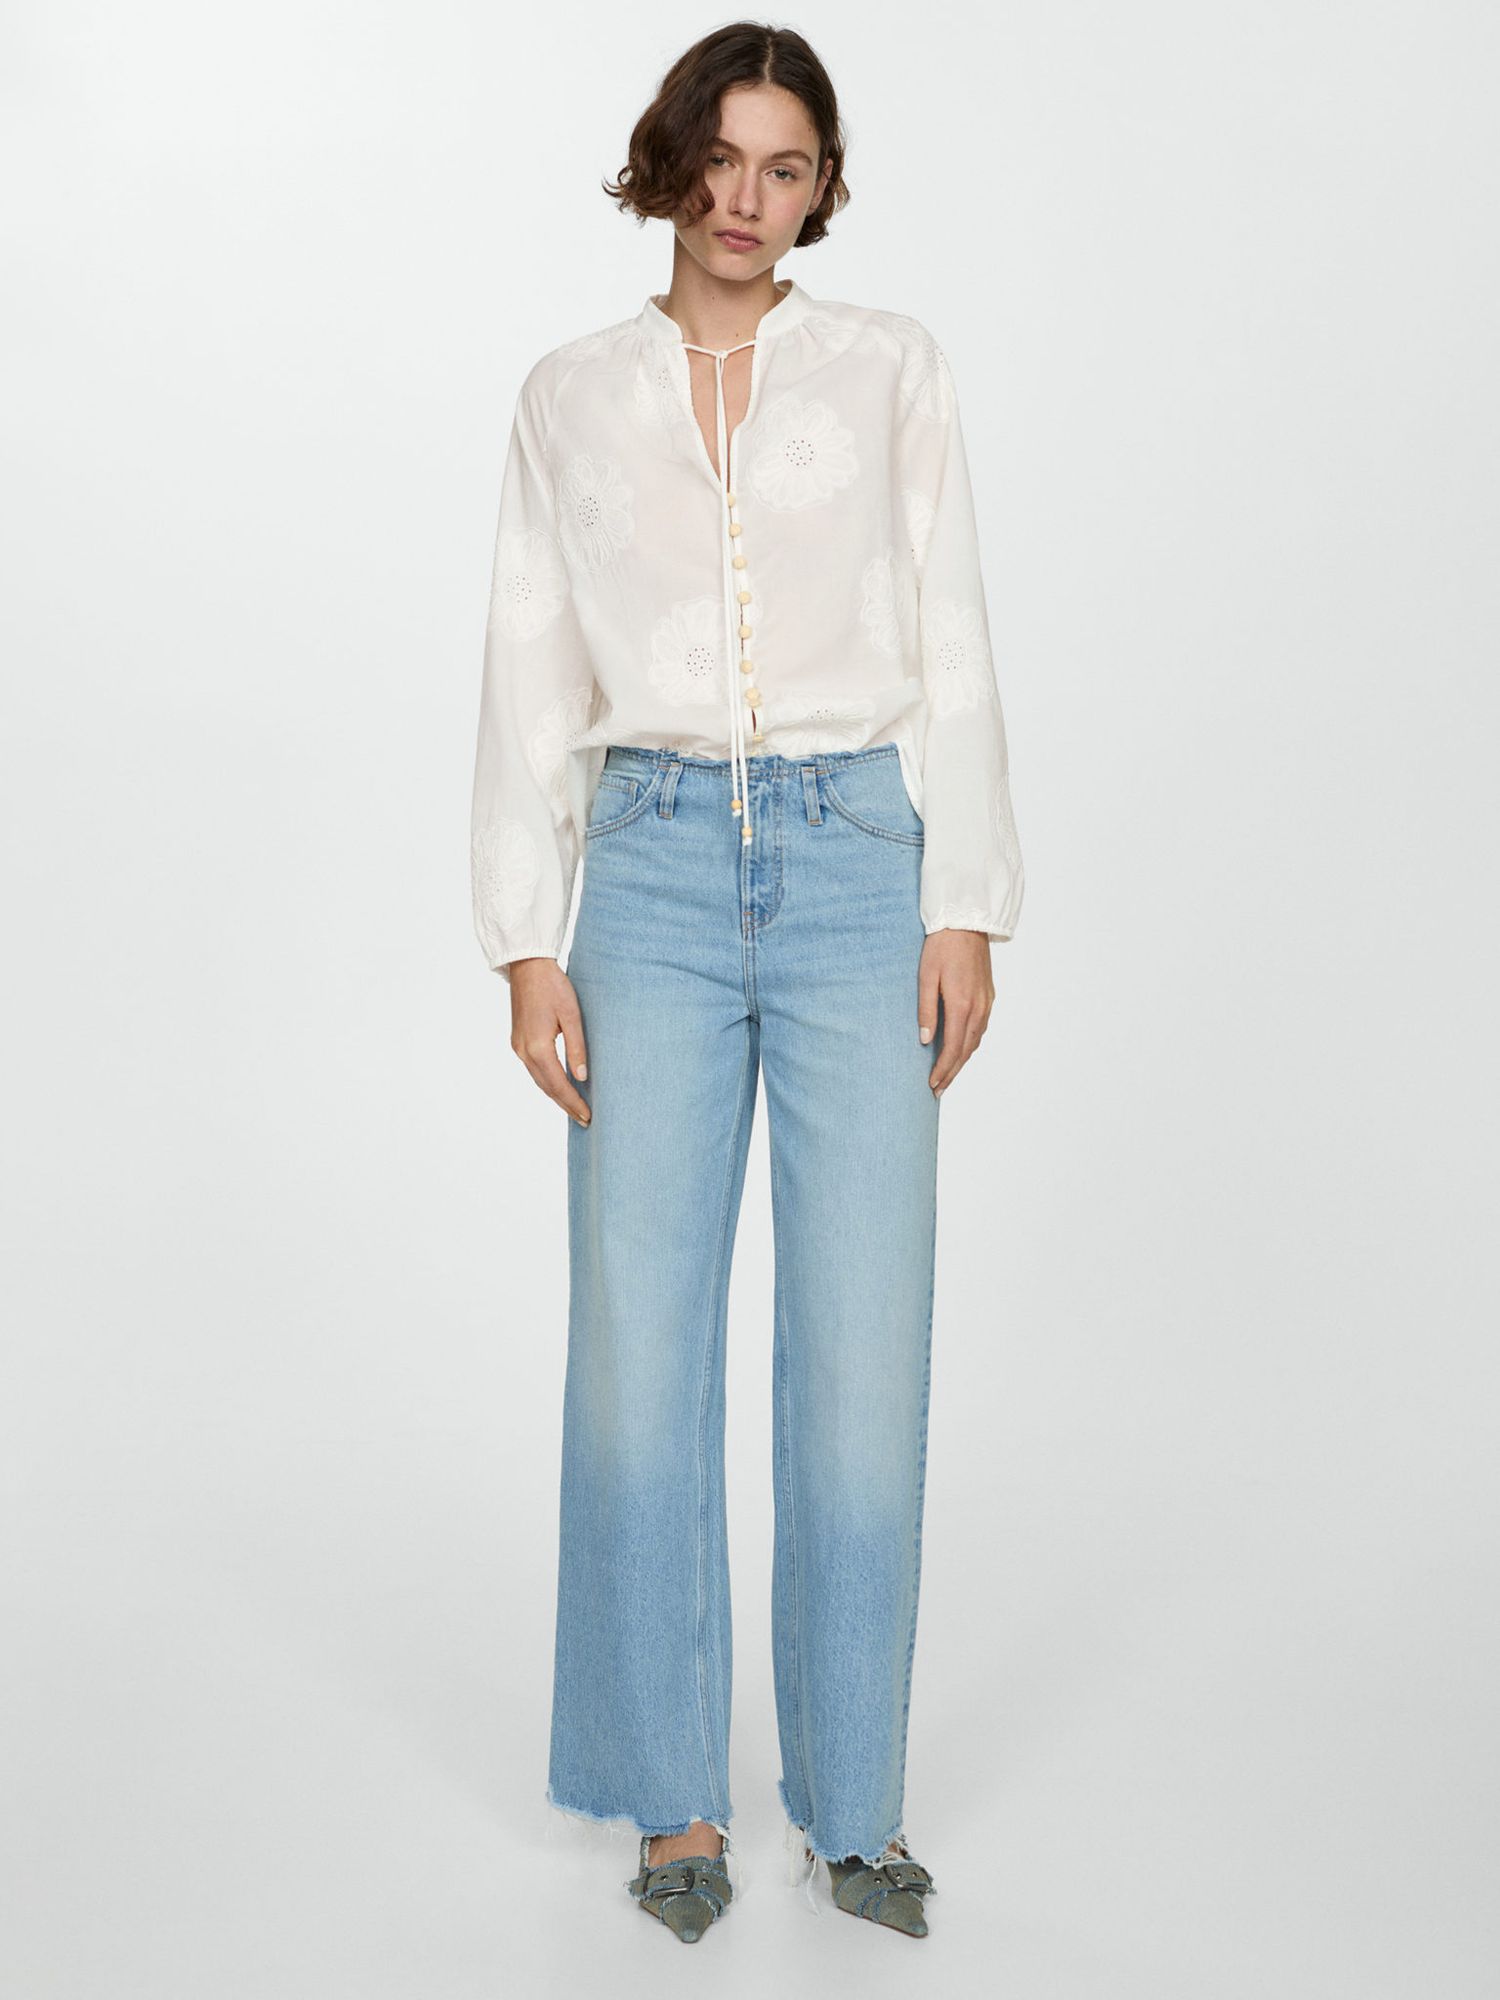 Buy Mango Woody Cotton Floral Embroided Blouse, Natural White Online at johnlewis.com